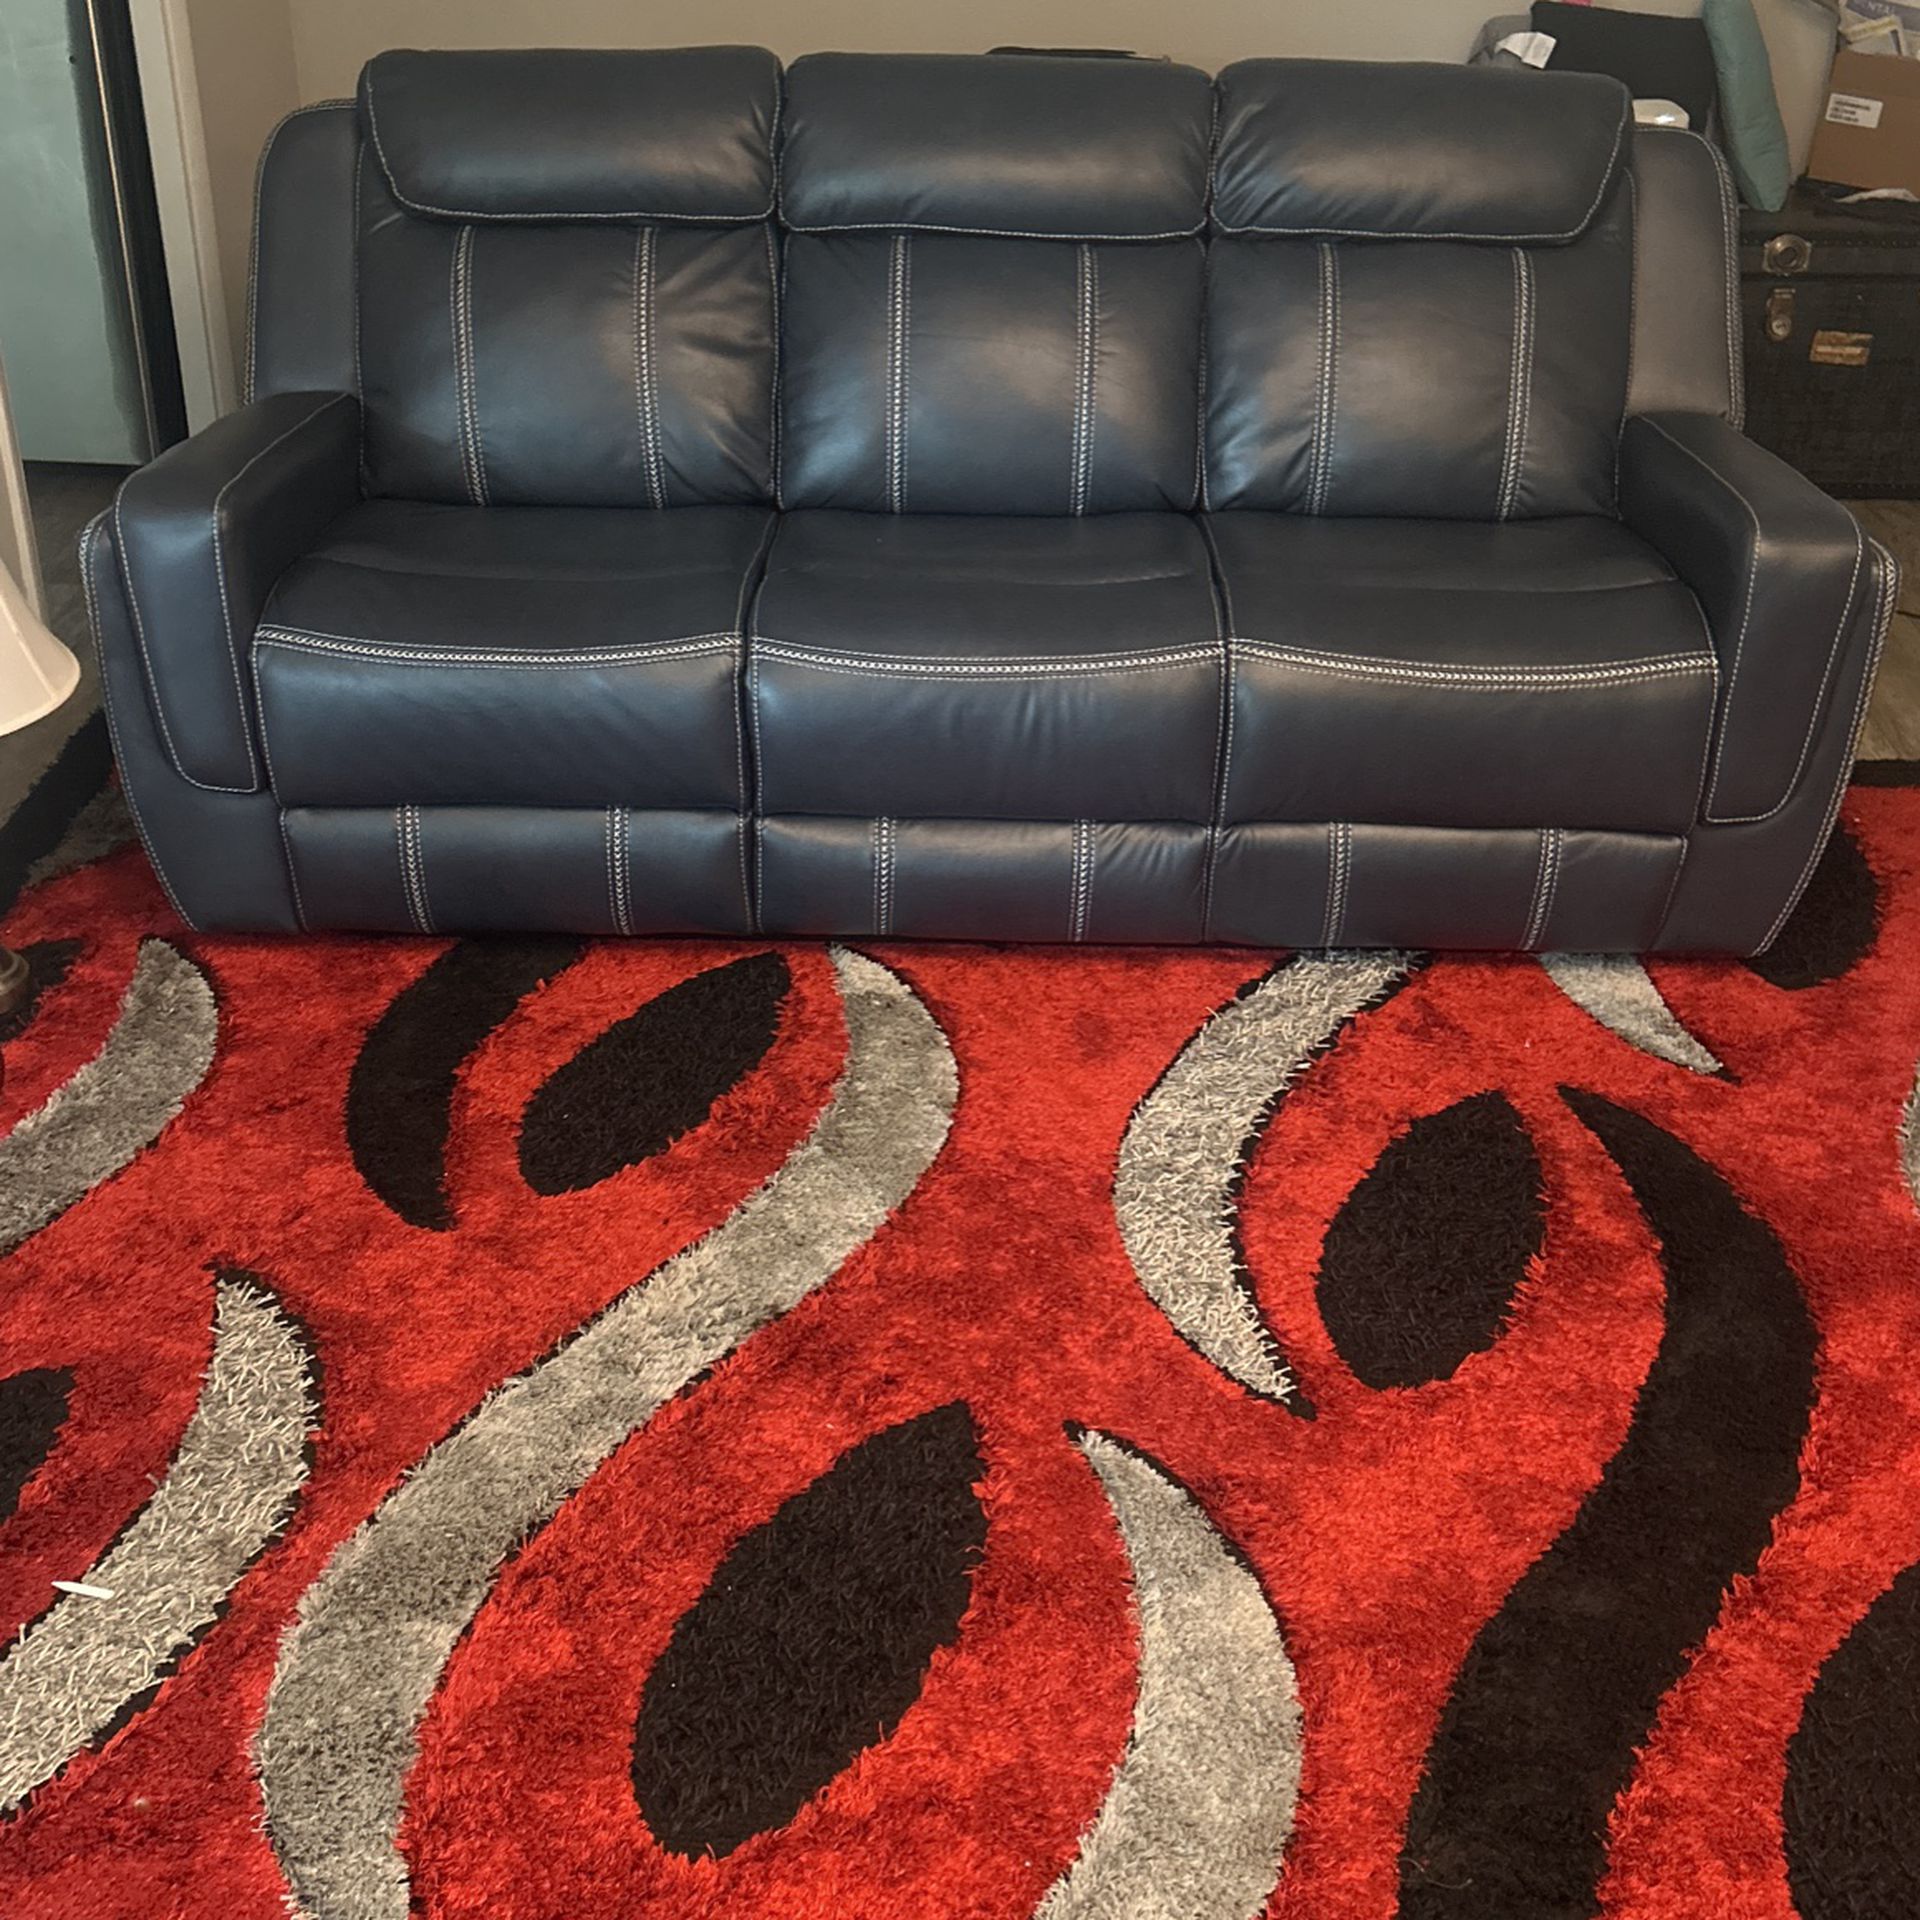 Leather Three Seat Sofa With Reliner